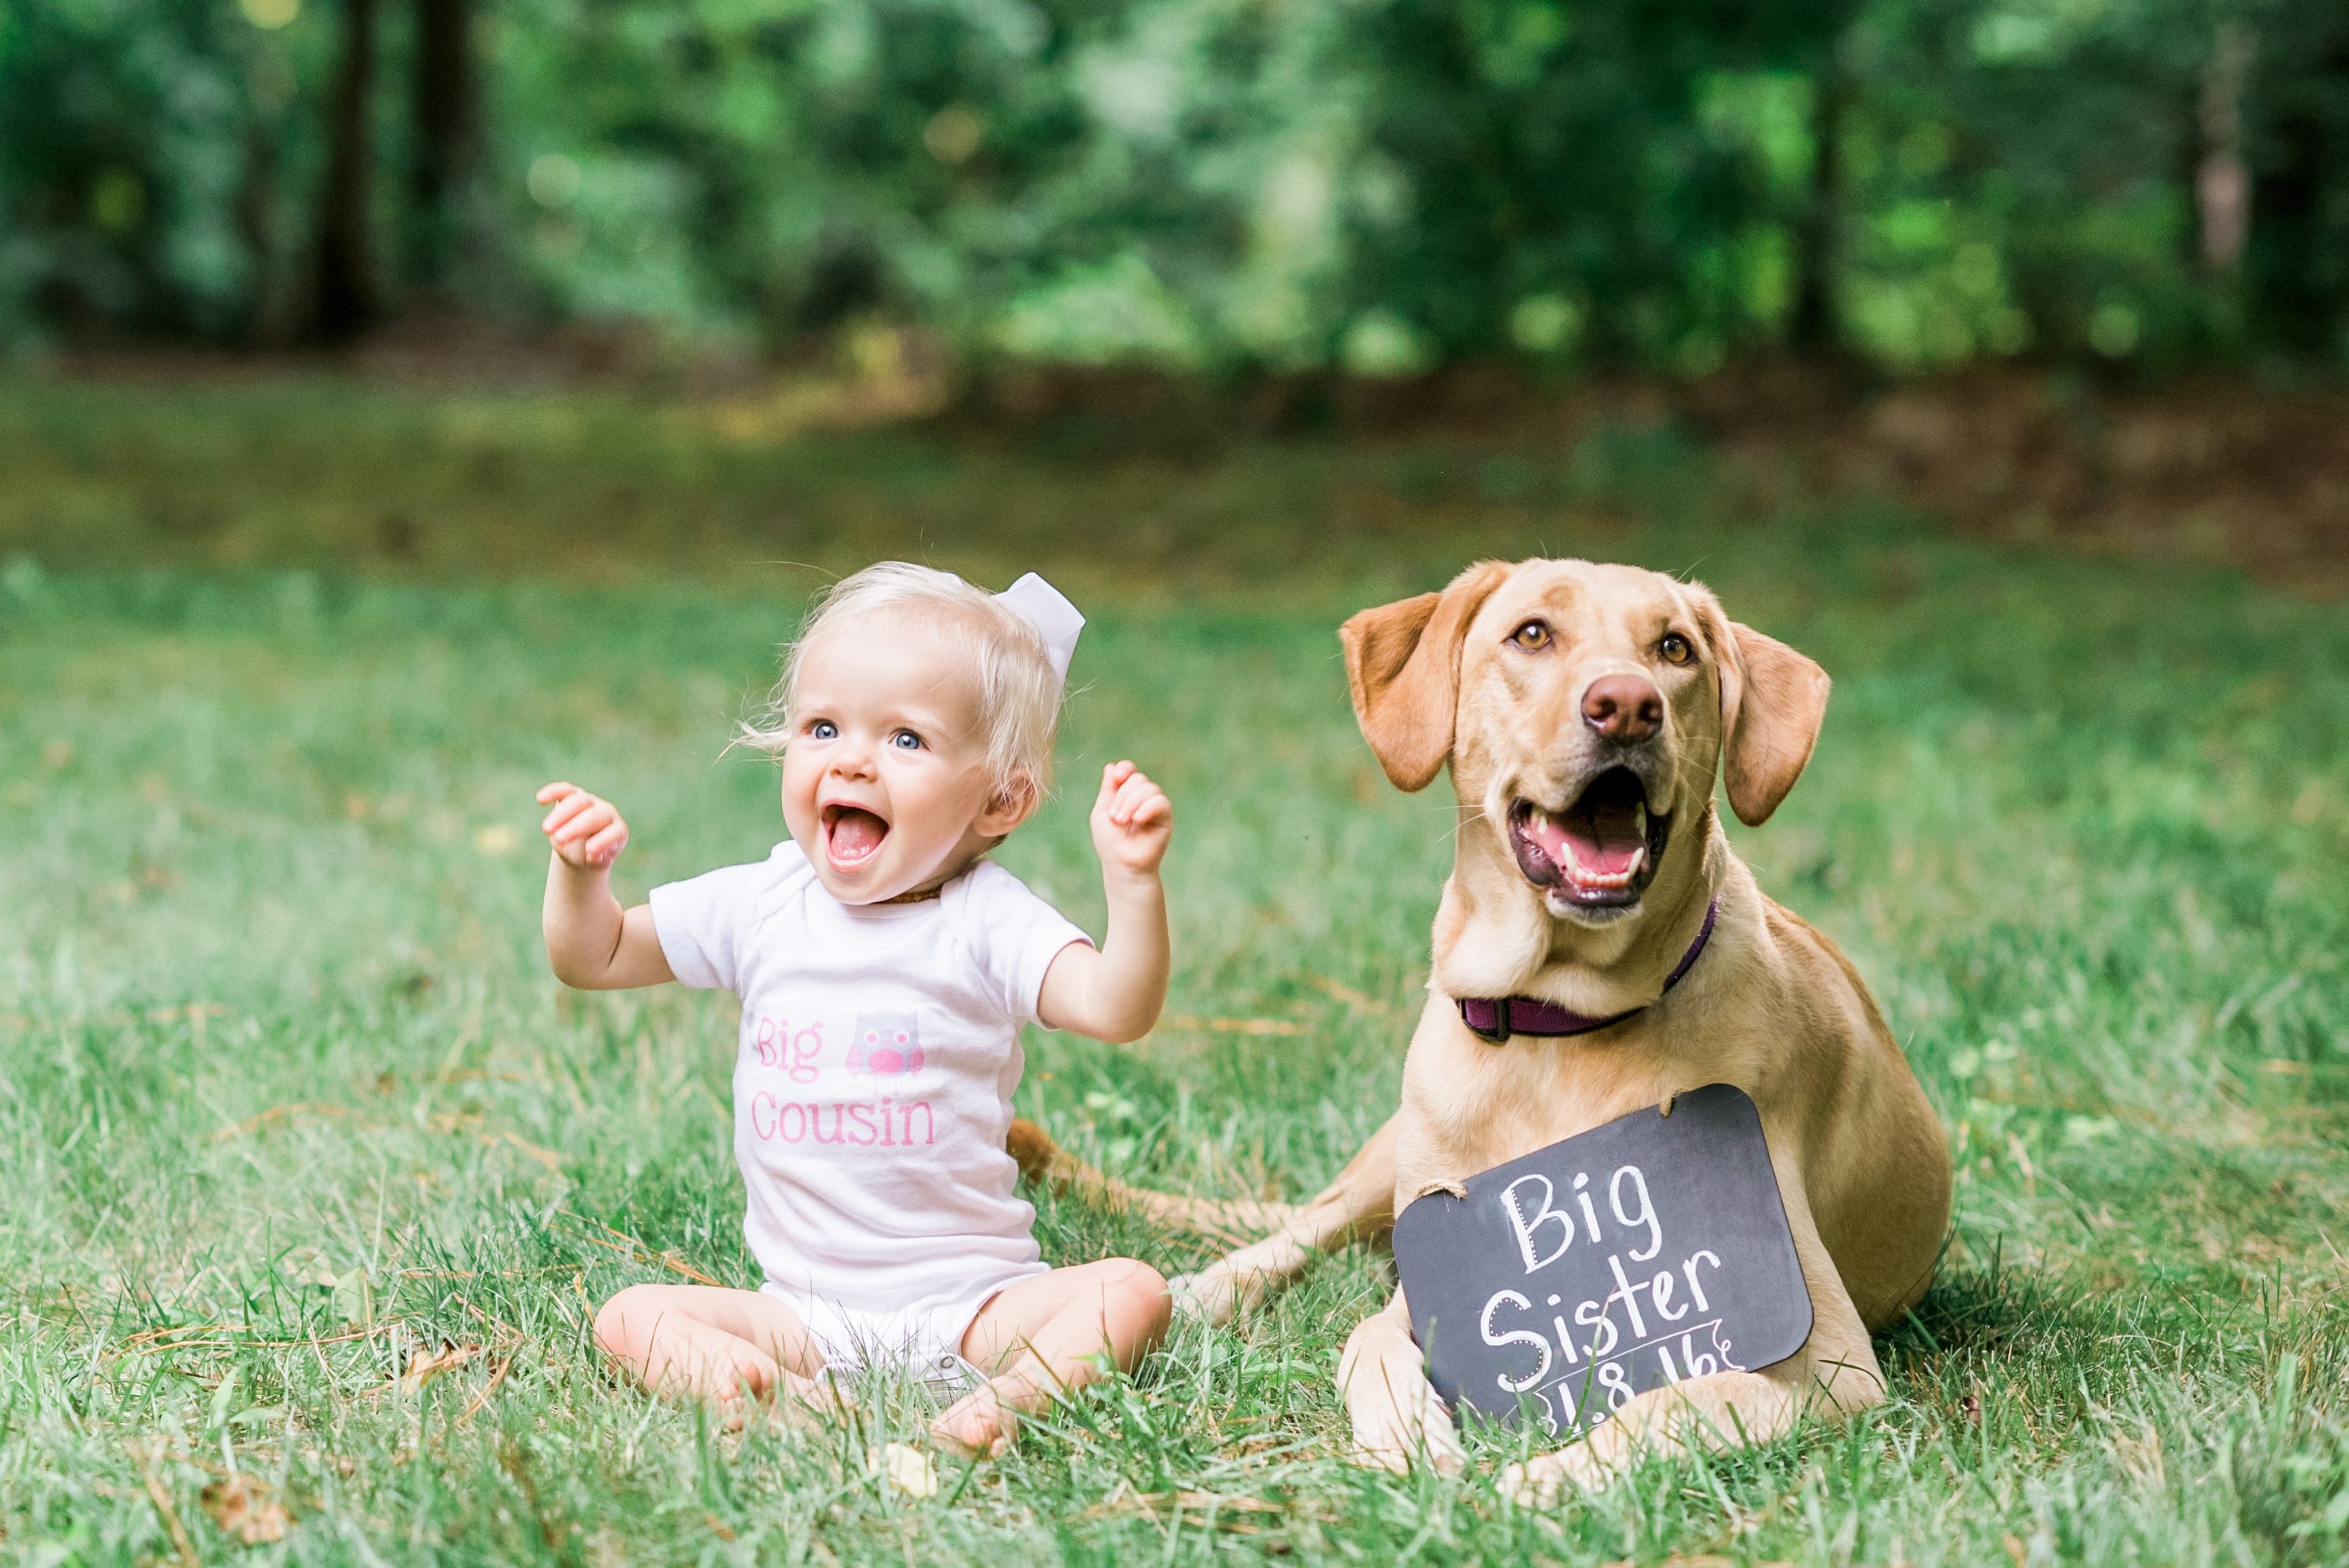 Big cousin & big sister, dog, baby announcement